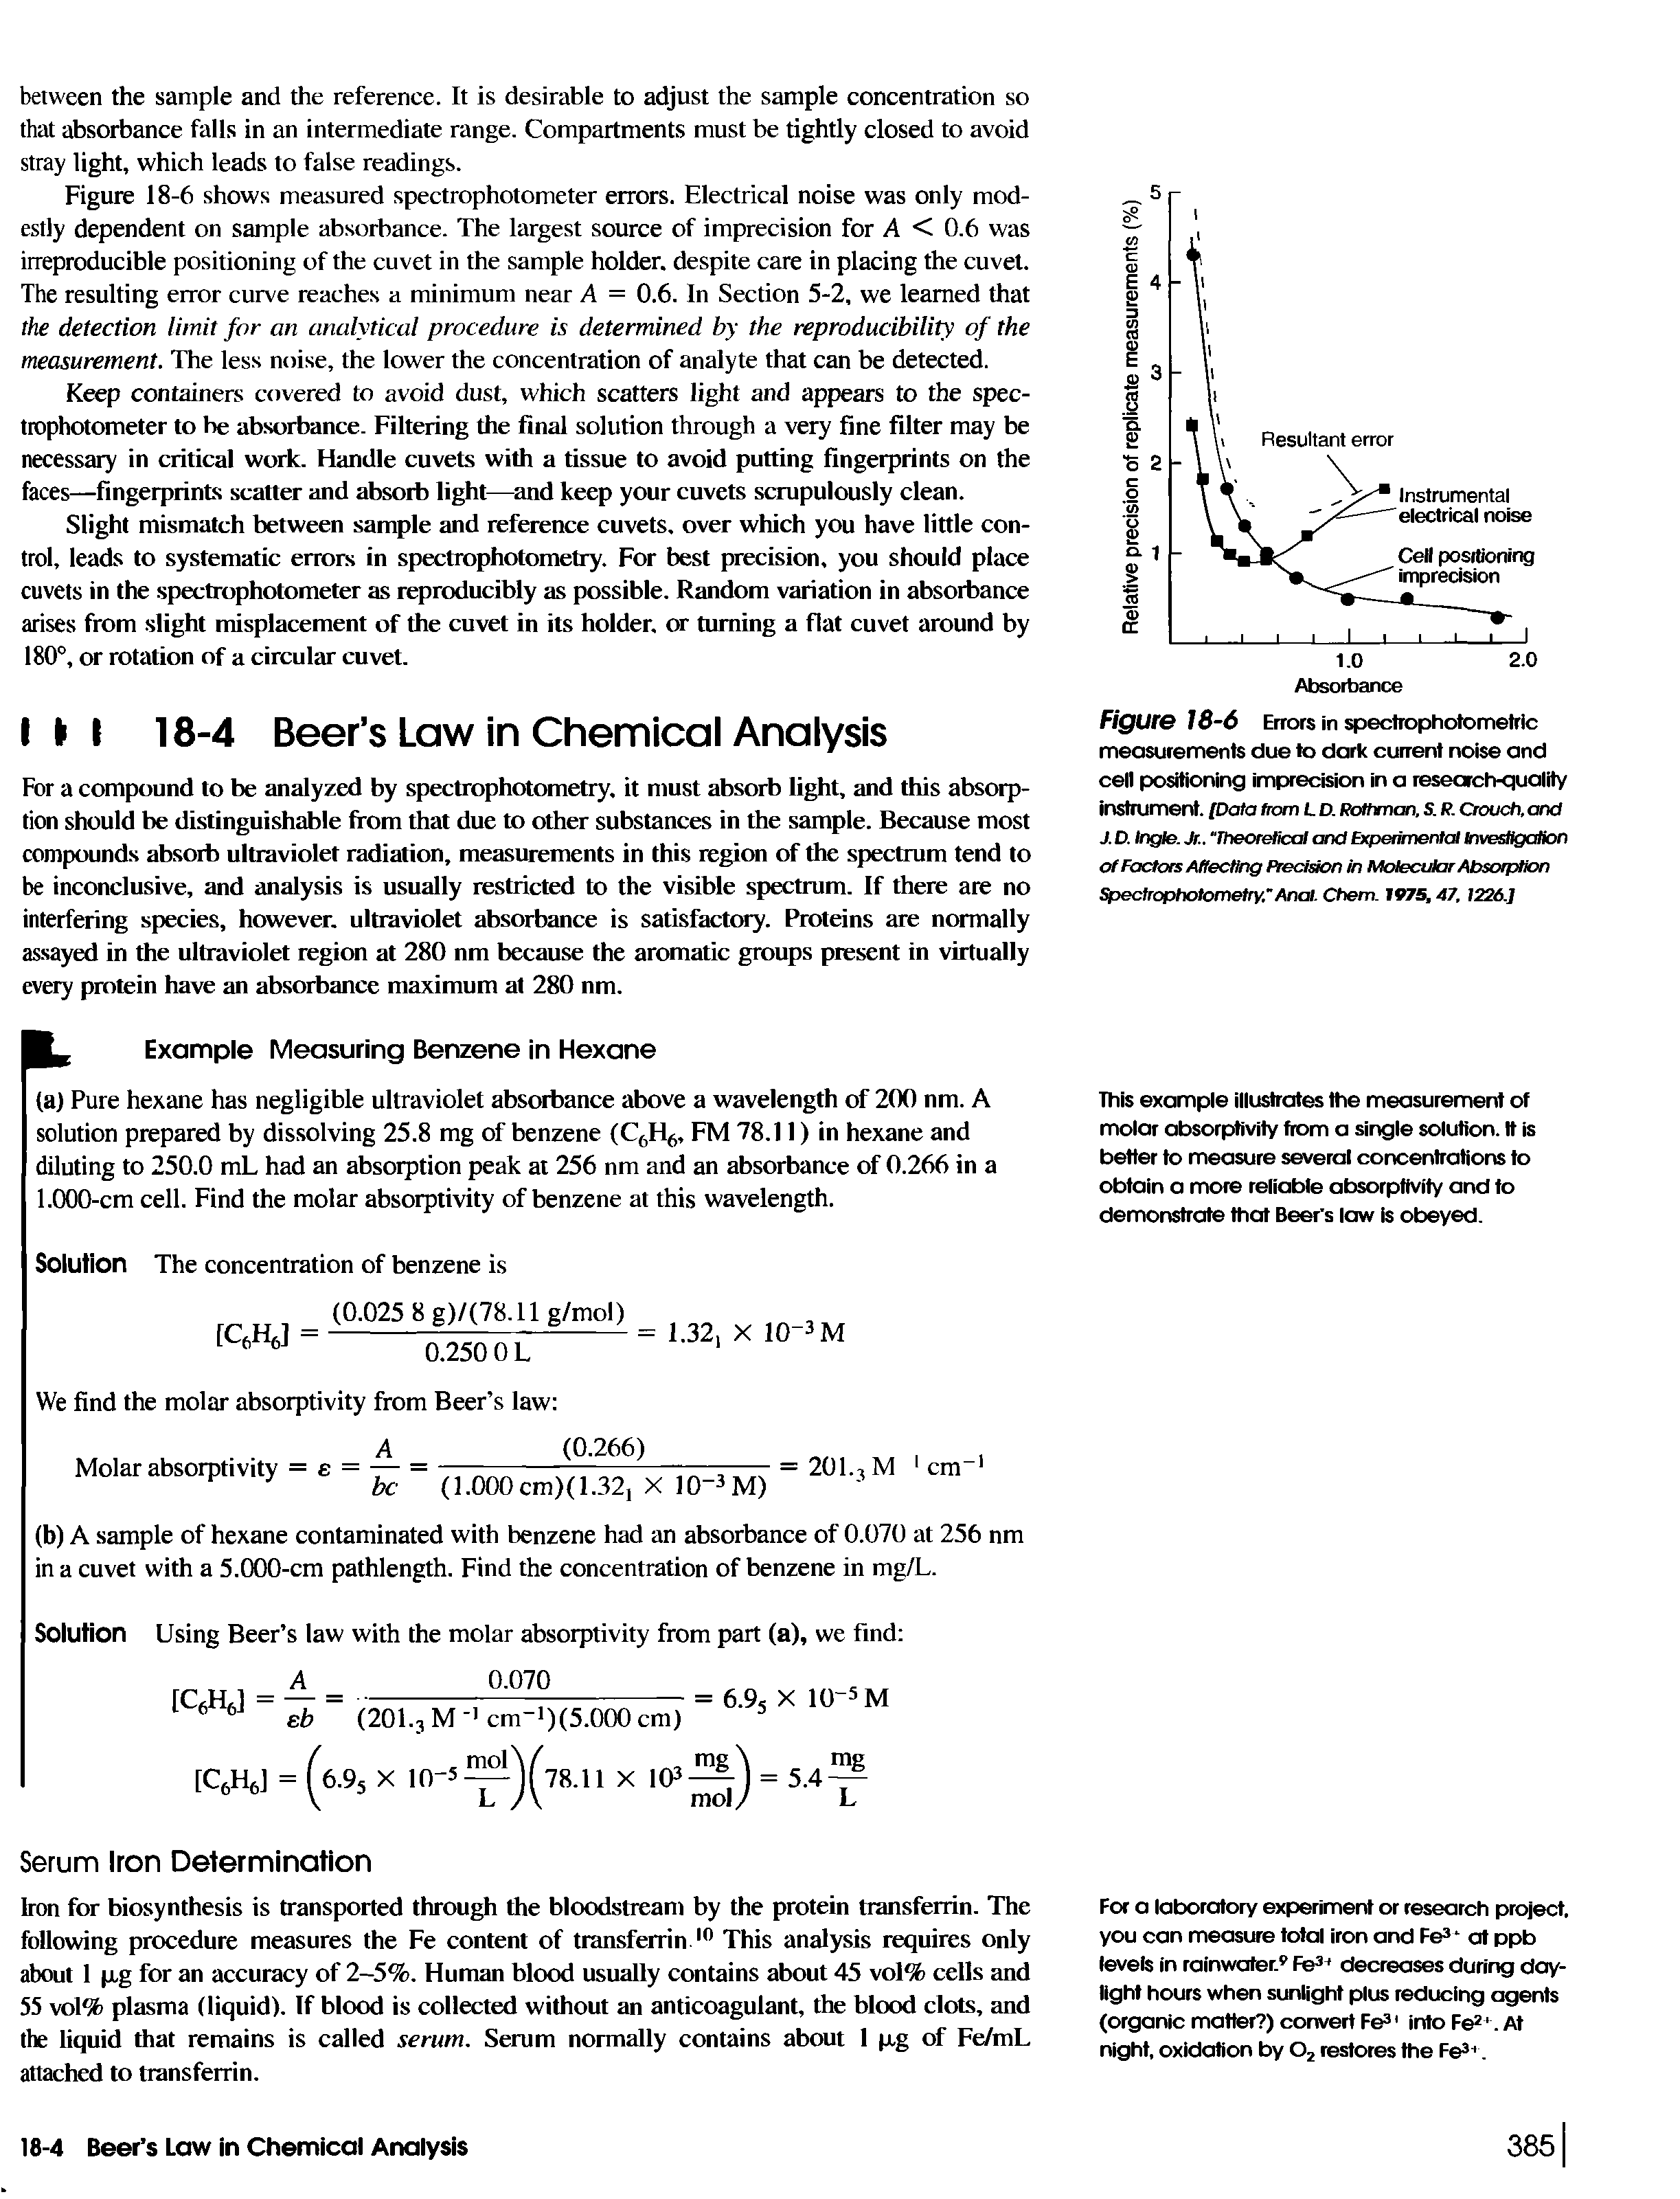 Figure 18-6 Errors in spectrophotomefric measurements due to dark current noise and cell positioning imprecision in a research-quality instrument. [Data from L D. Rothman. S. R. Crouch, and J. D. Ingle. Jr.."theoretical and Experimental Investigation of Factors Affecting Precision in Molecular Absorption Spectrophotometry." Anal. Chem. 1975,47, 1226.]...